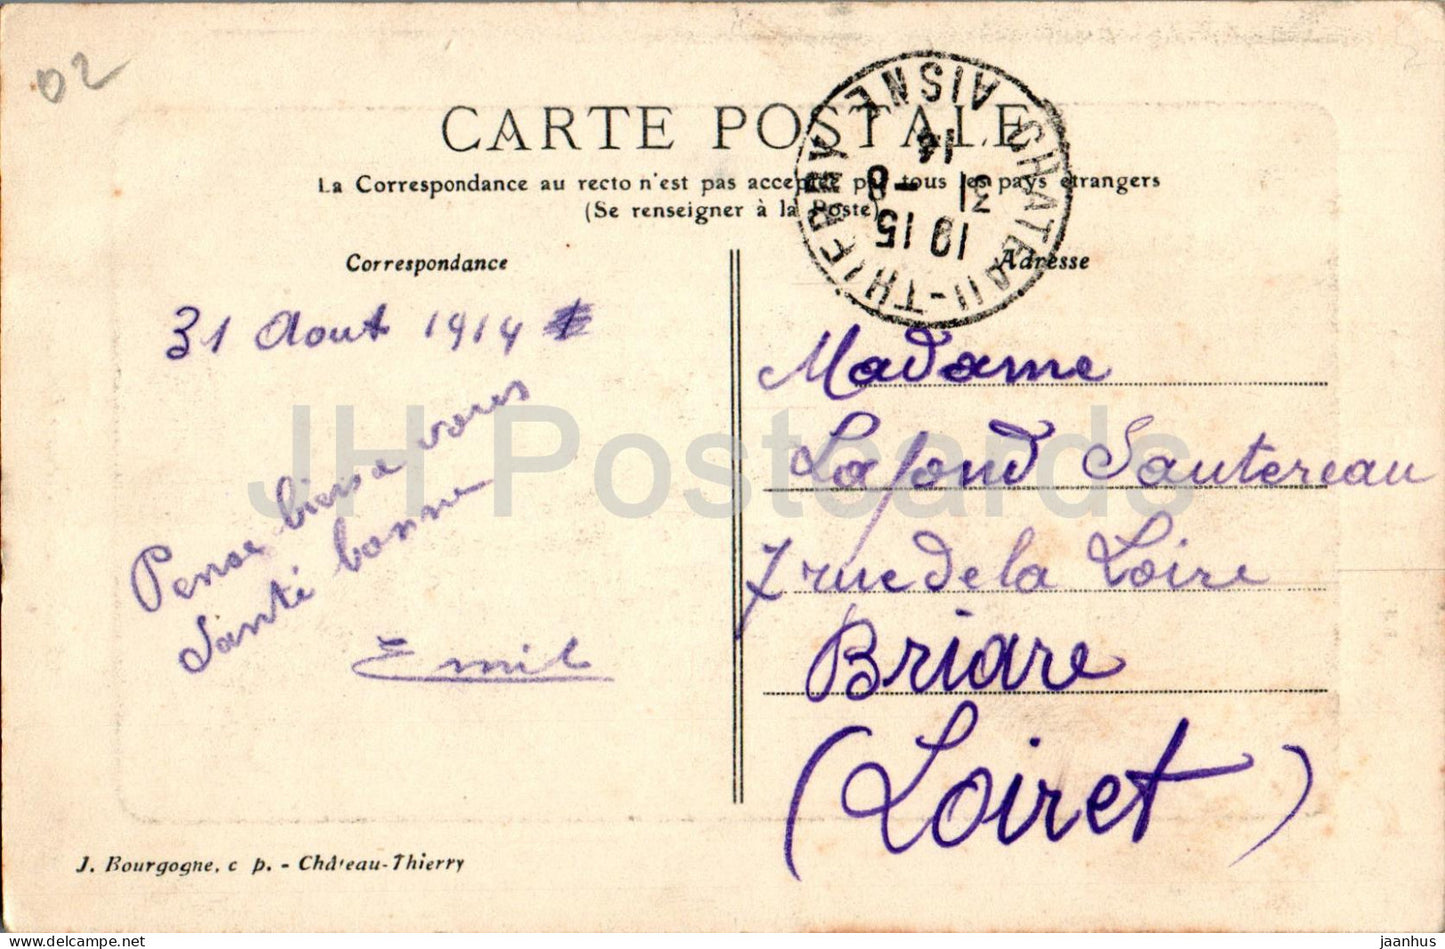 Chateau Thierry - Sortie du Vieux Chateau - 23 - old postcard - 1914 - France - used